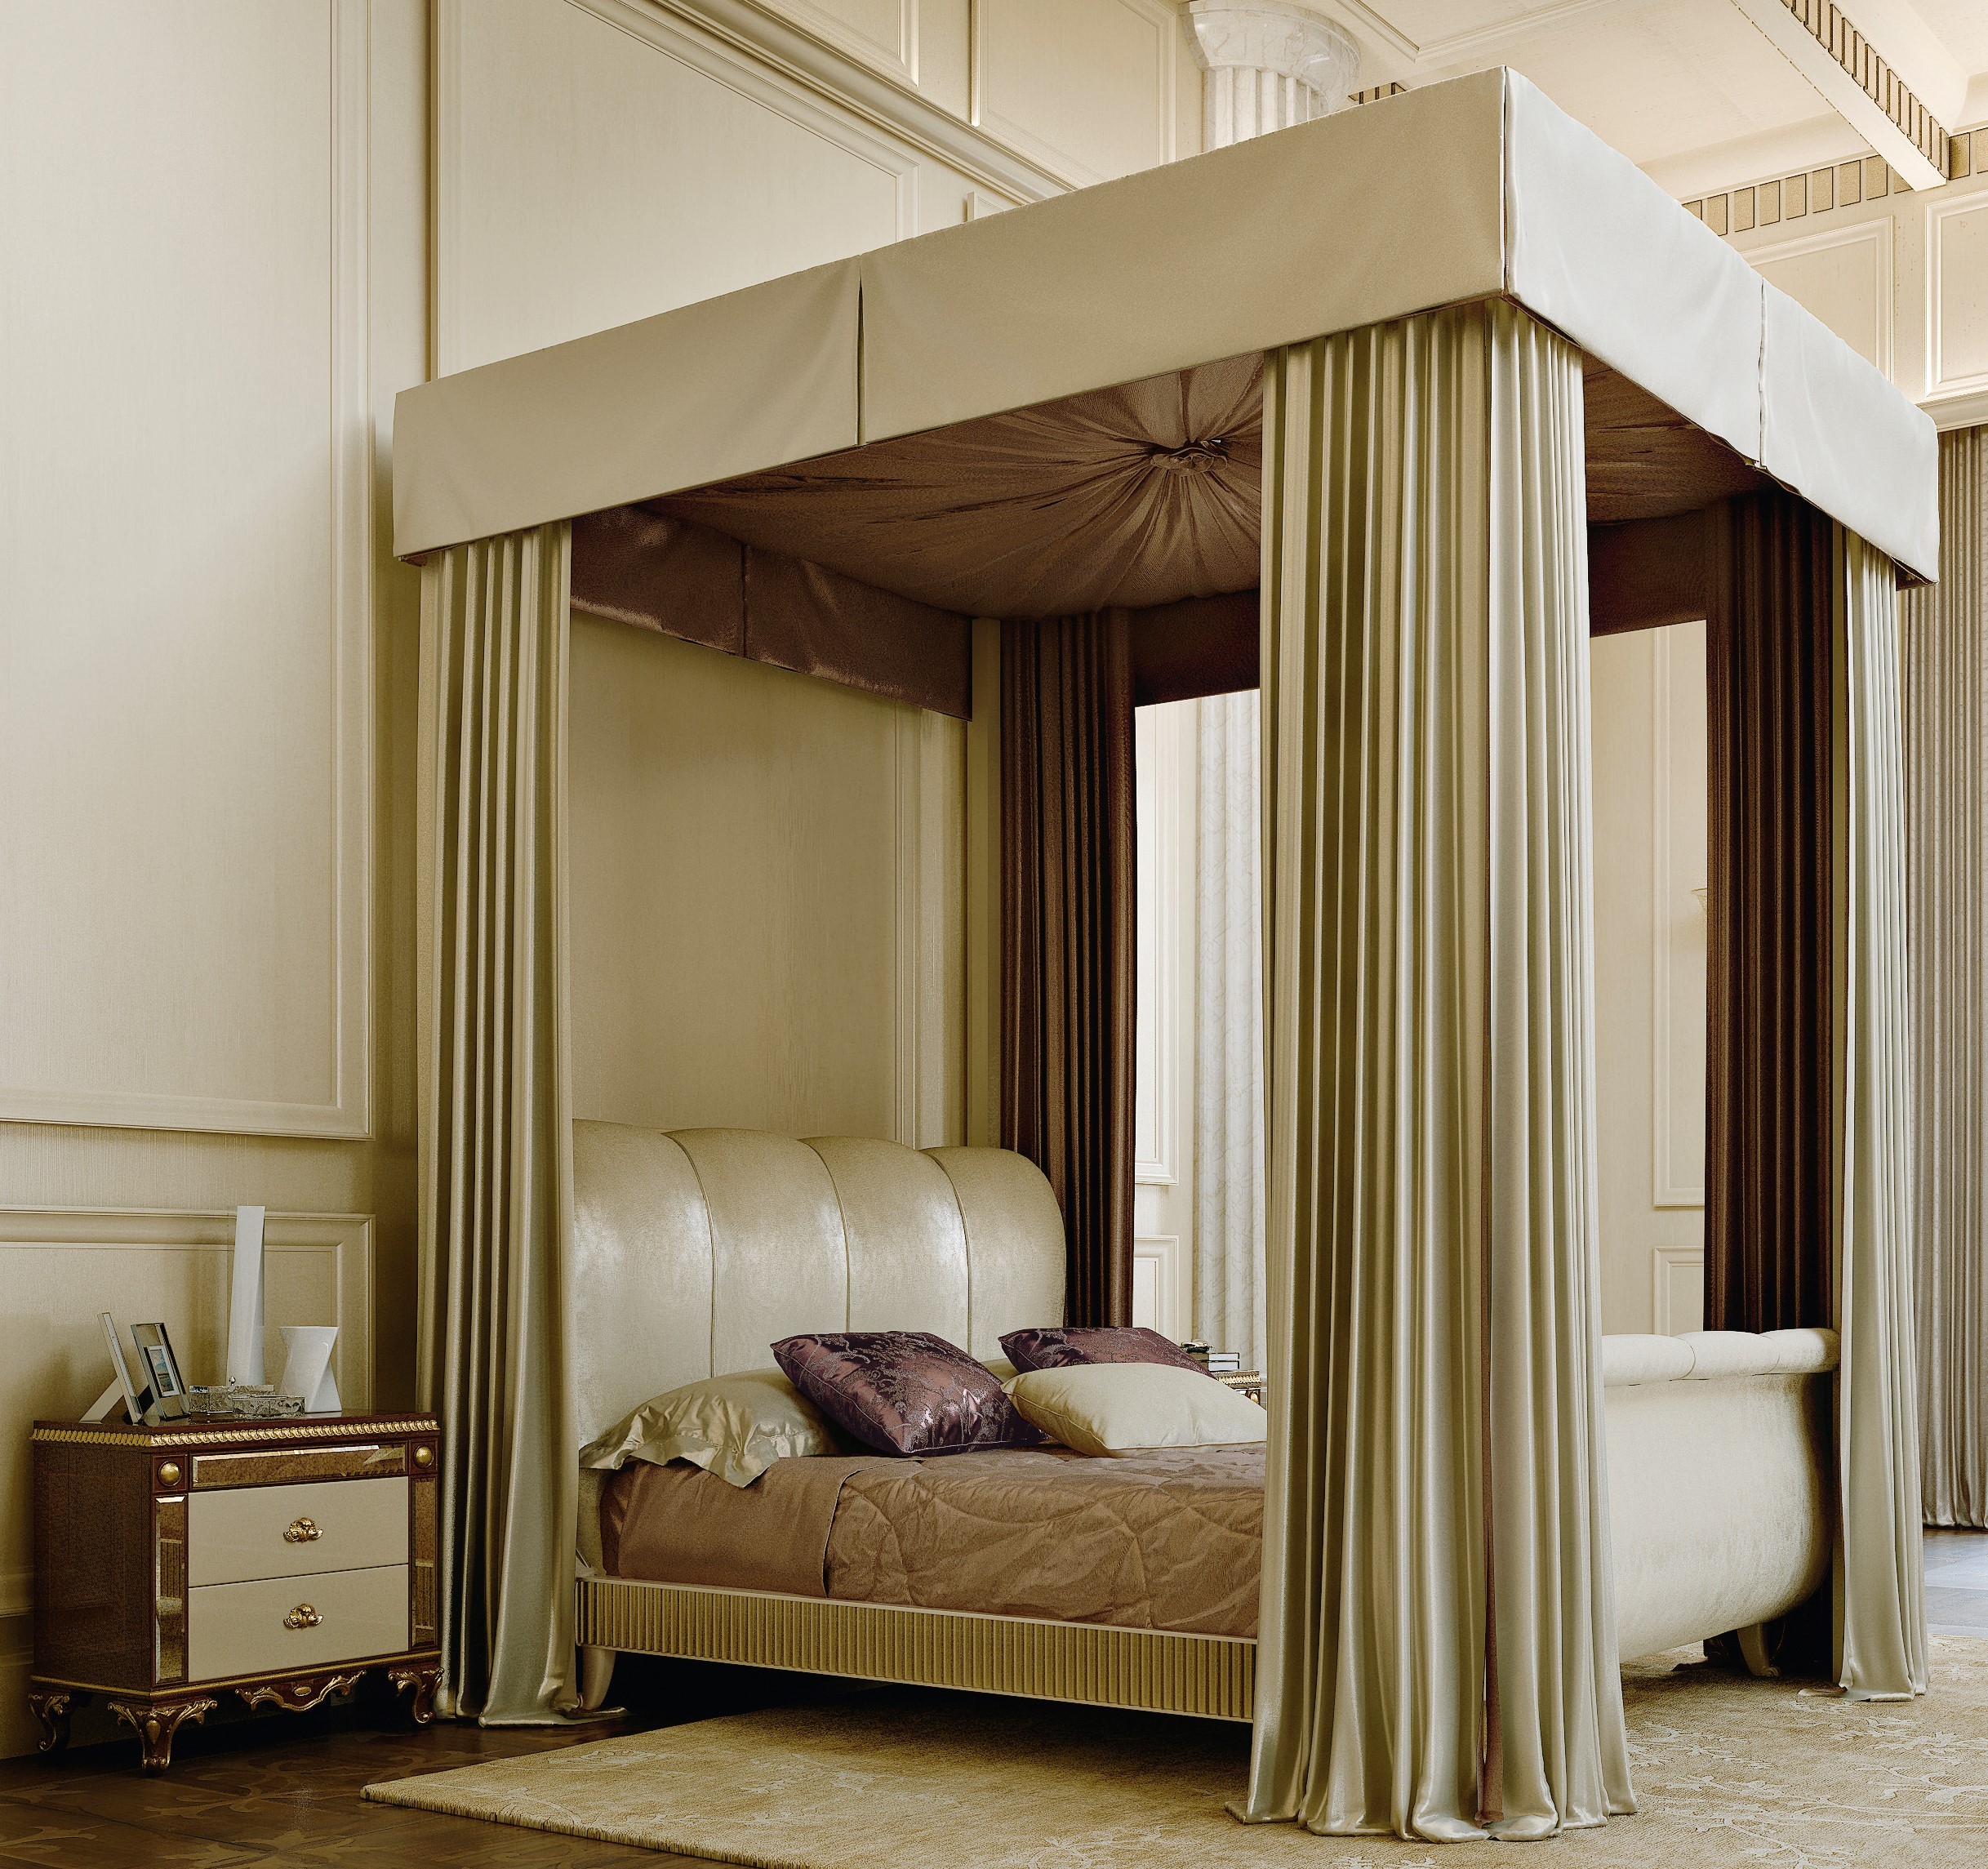 Queen and King Sized Beds Luxurious bed with canopy